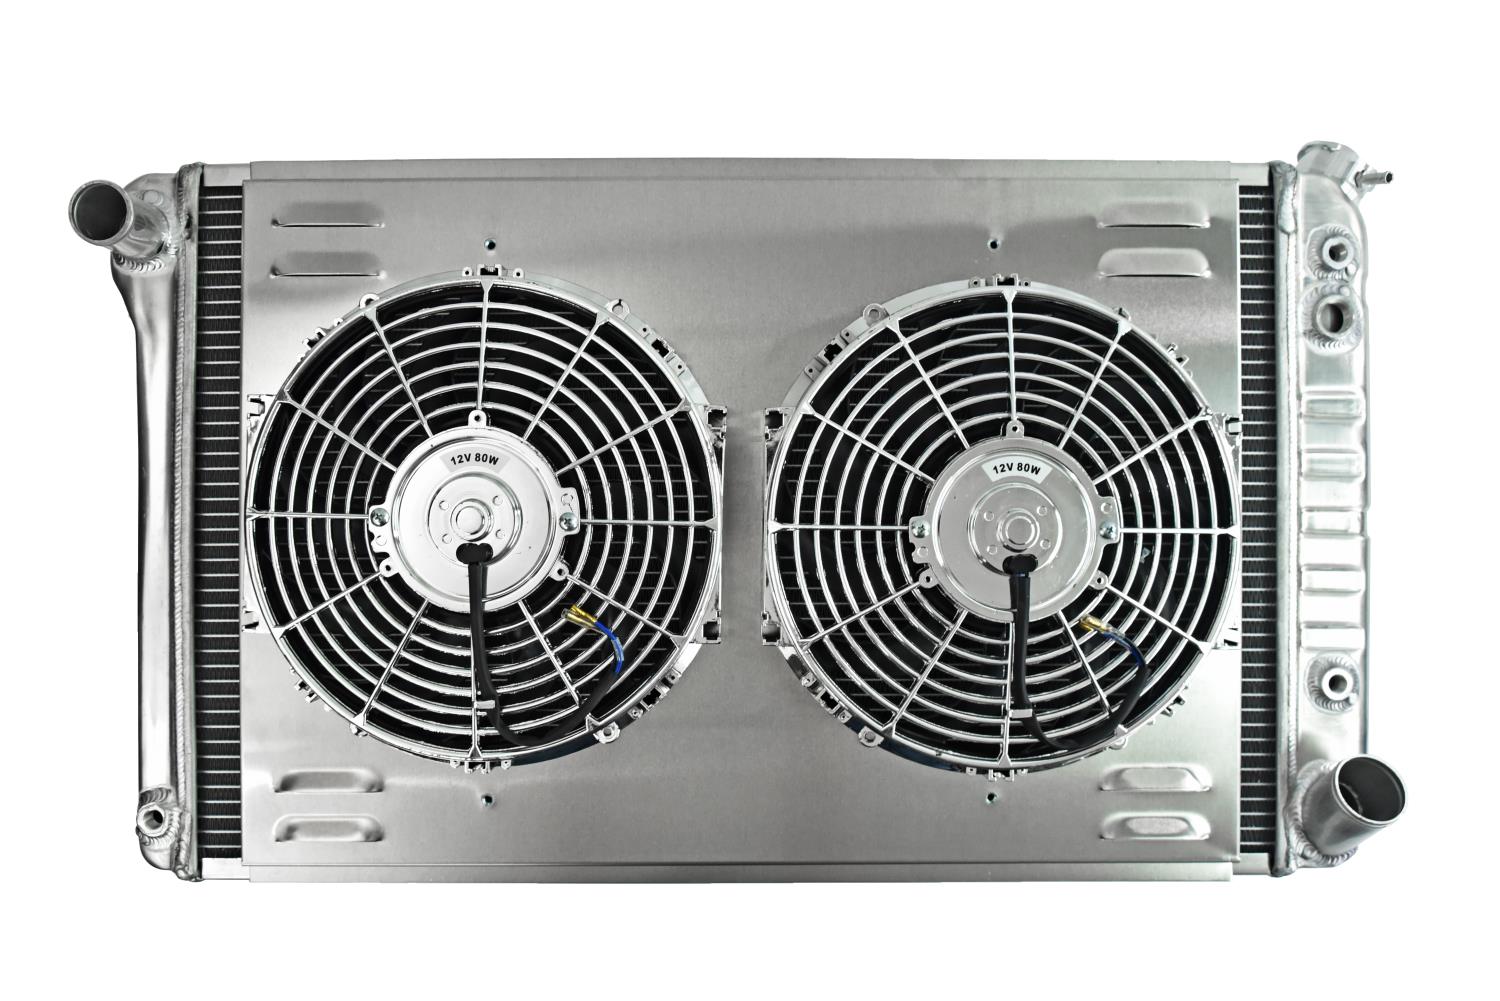 Reproduction Aluminum Radiator & Fan Combo for 1967-1972 Chevrolet & GMC Trucks with Heater Return [Dual 12 in. Fans]